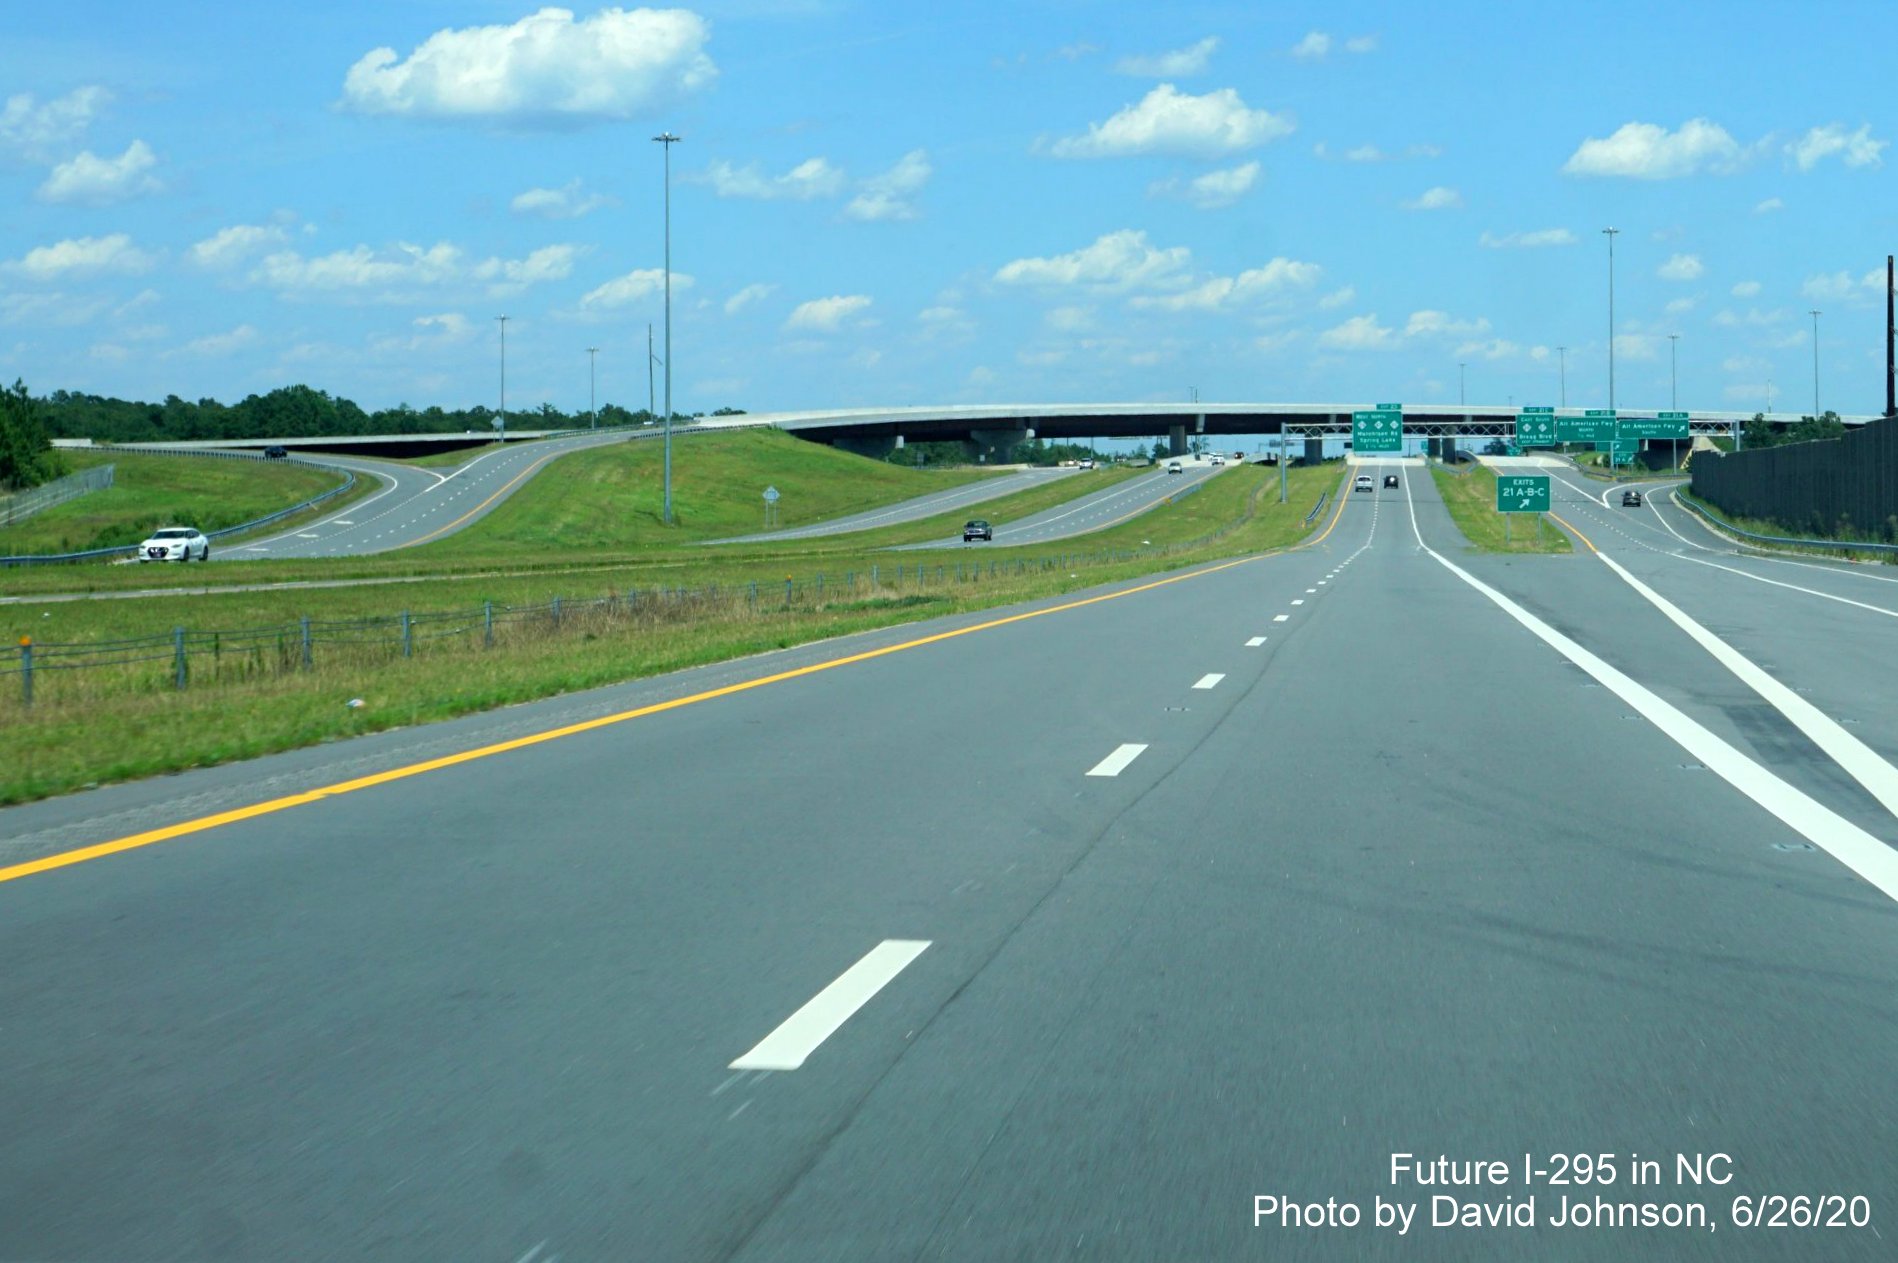 Image of flyover ramp to I-295 South from All American Freeway, by David Johnson June 2020